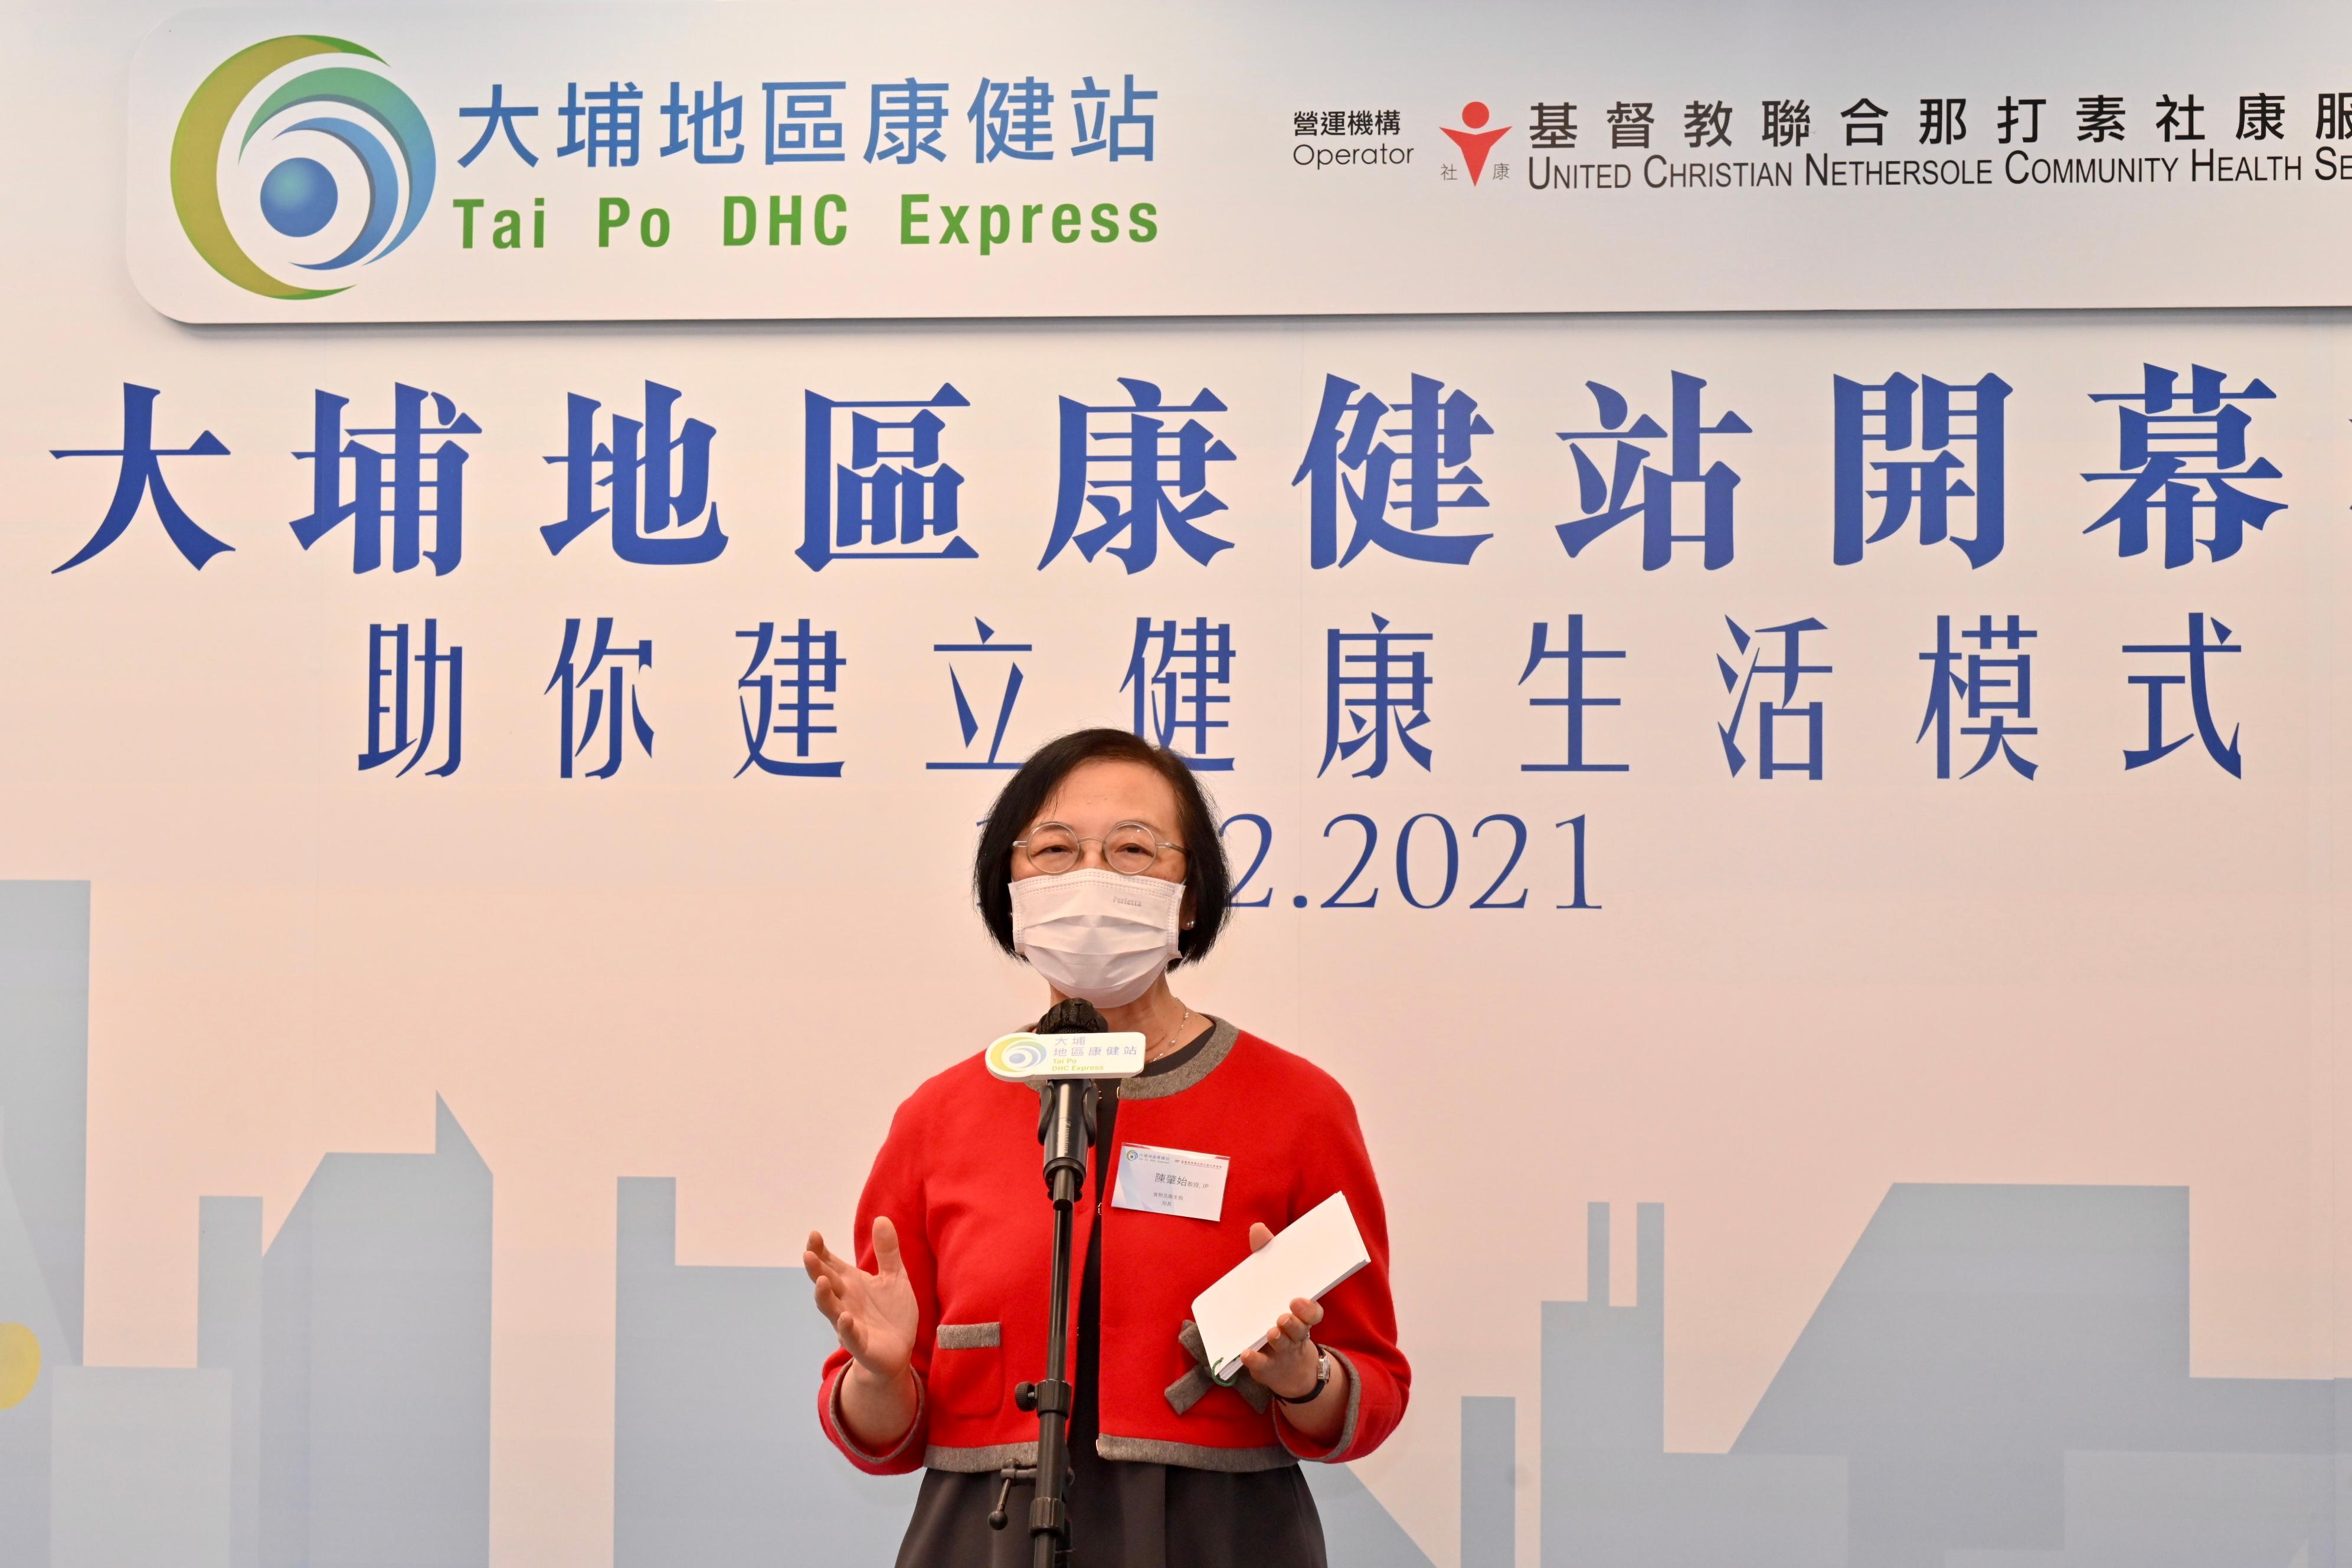 The Secretary for Food and Health, Professor Sophia Chan, delivers a speech at the opening ceremony of the Tai Po District Health Centre Express today (December 16).